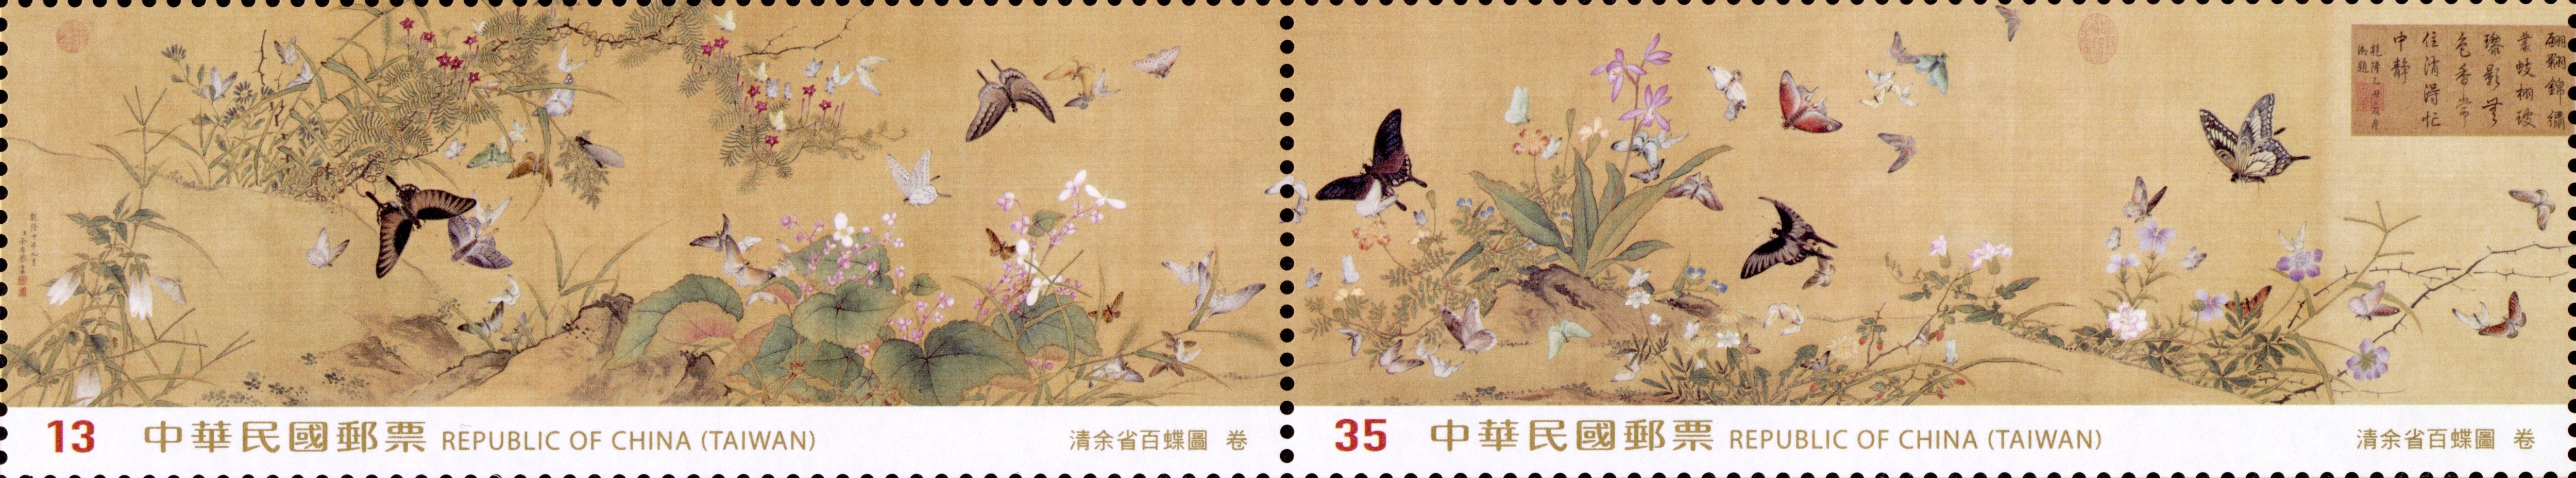 TAIPEI 2023 – 39th Asian International Stamp Exhibition Postage Stamps: Myriad Butterflies